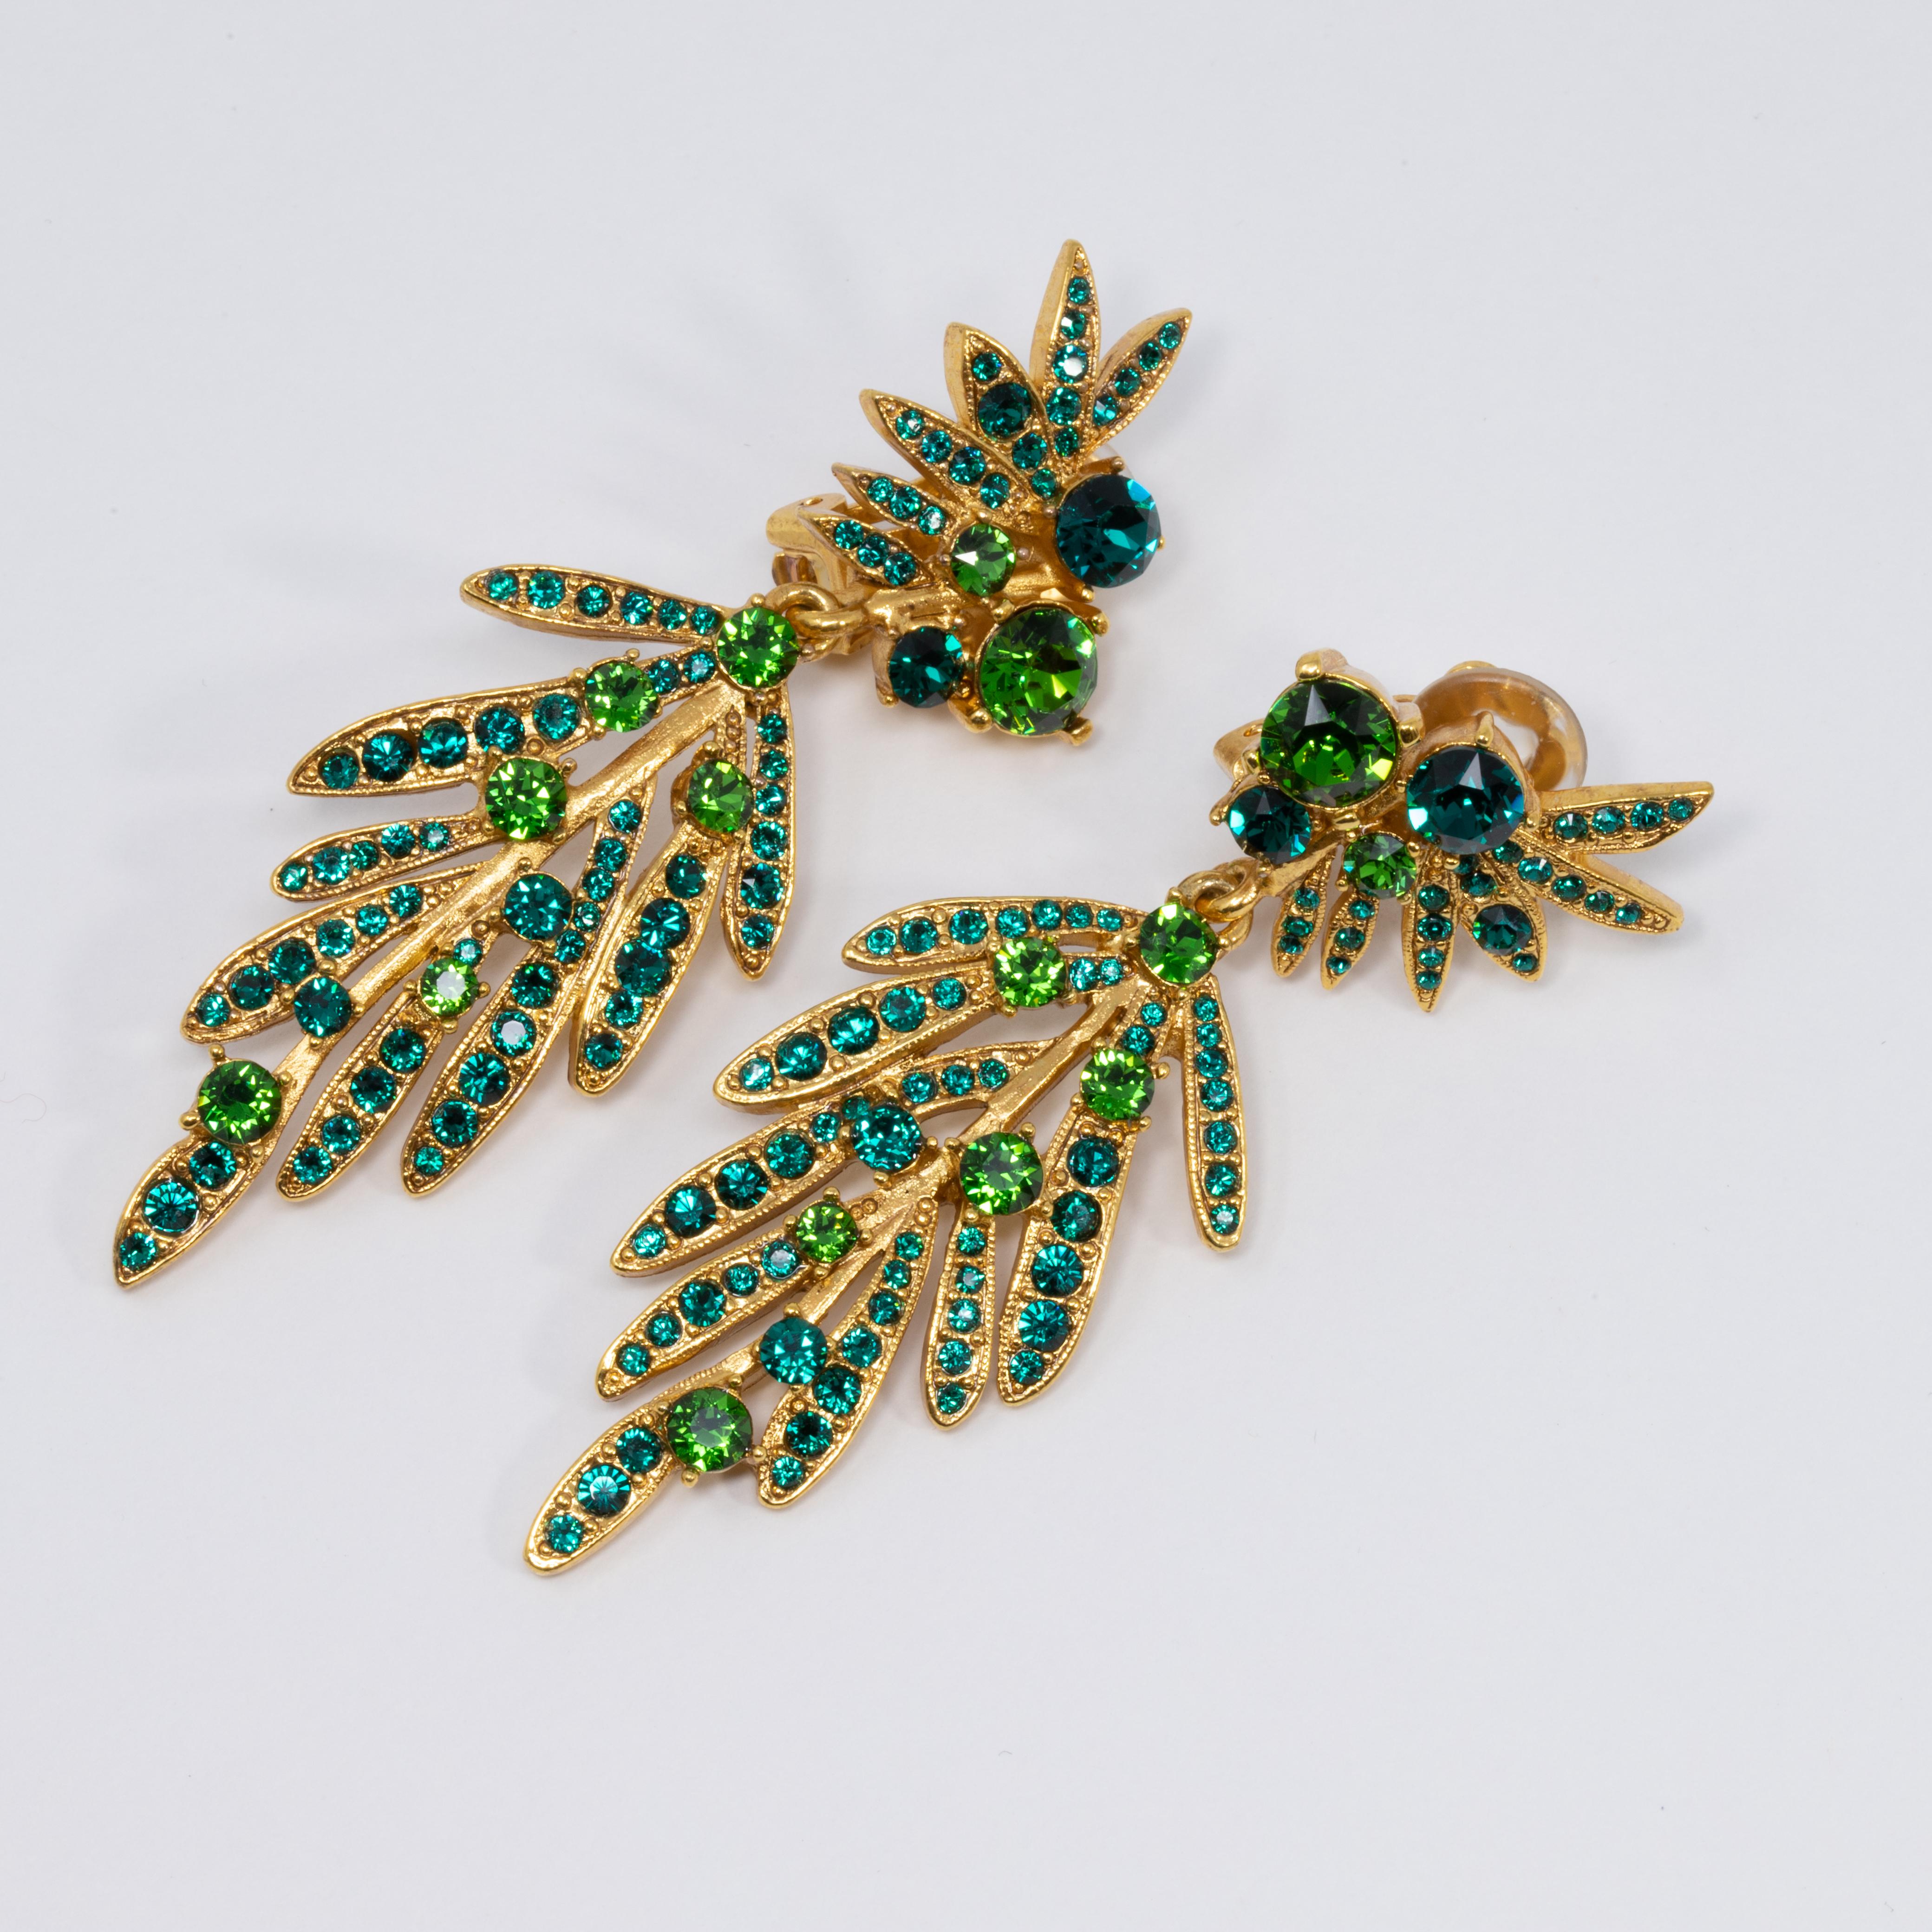 An exquisite pair of earrings by Oscar de la Renta! Each earring features dangling gold-plated tropical leaves accented with green Swarovski crystals. 

Hallmarks: Oscar de la Renta, Made in USA